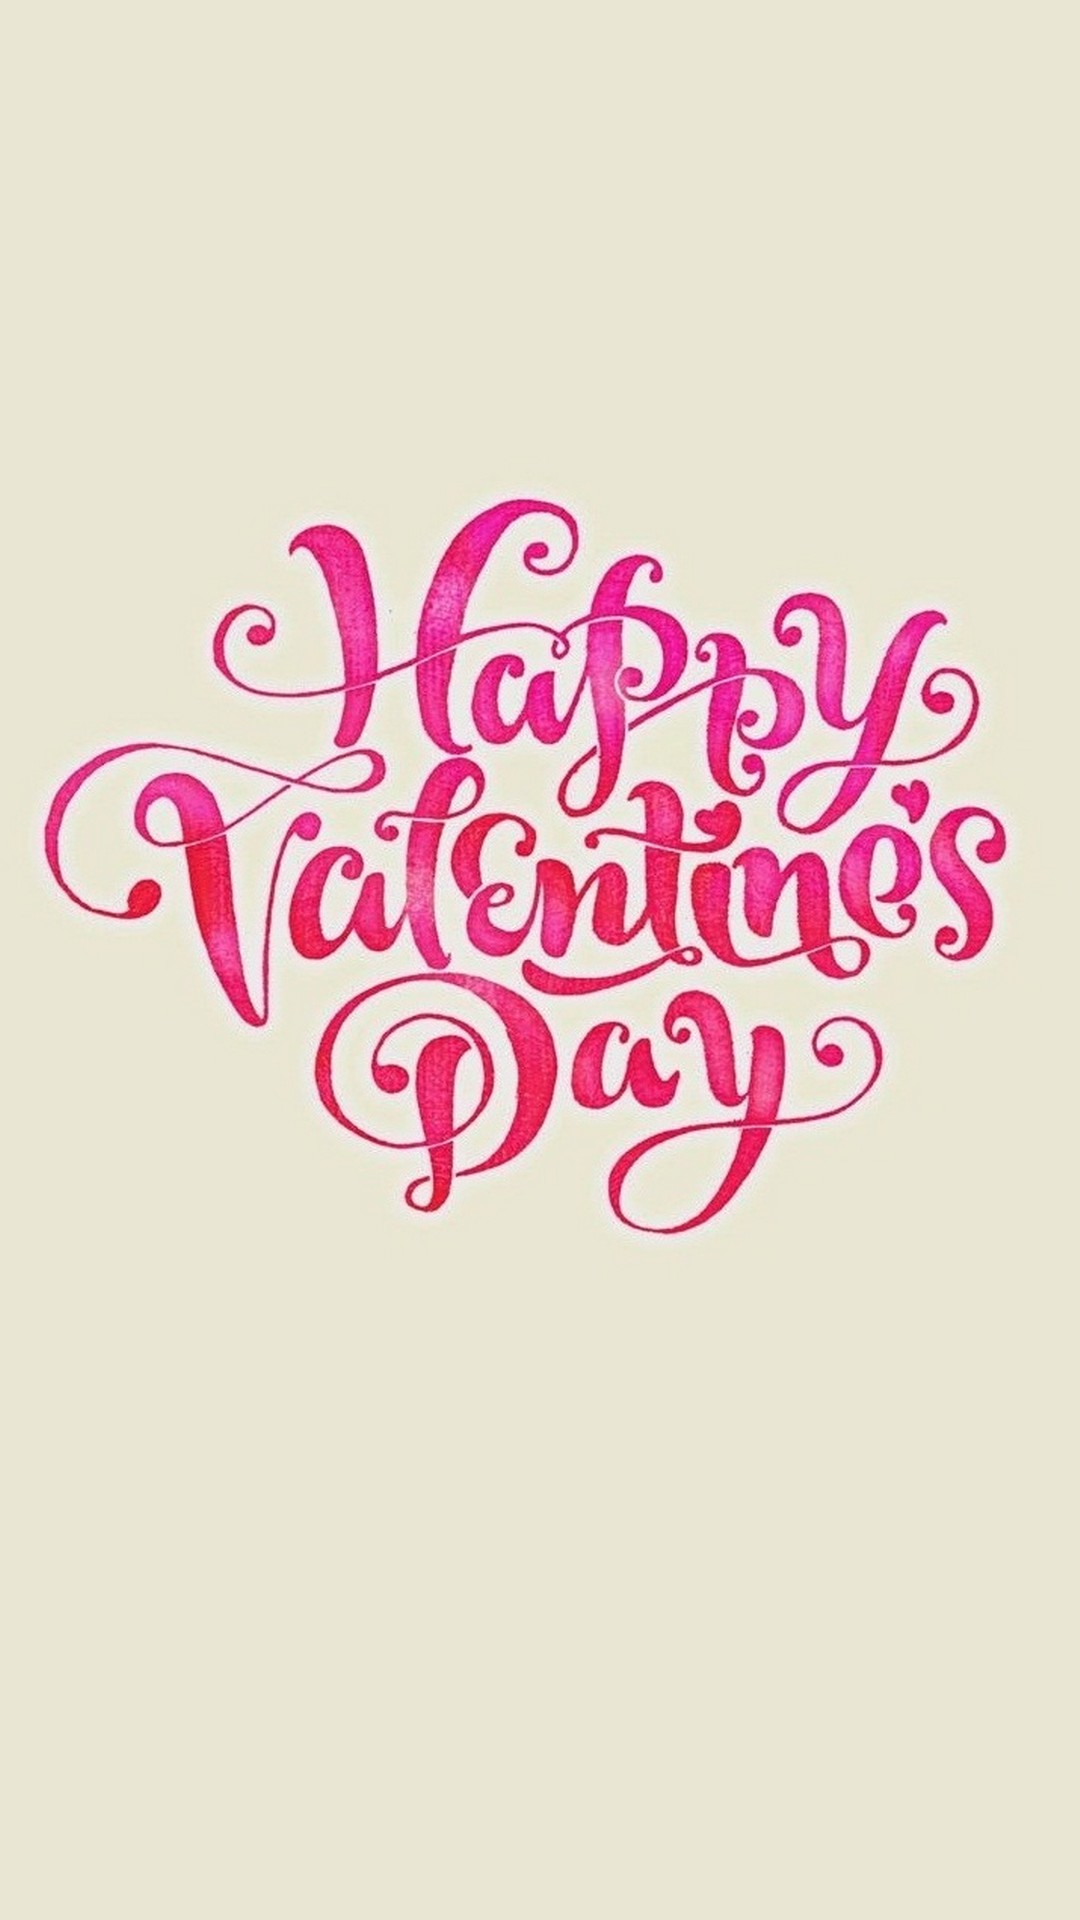 Android Wallpaper Happy Valentines Day Image